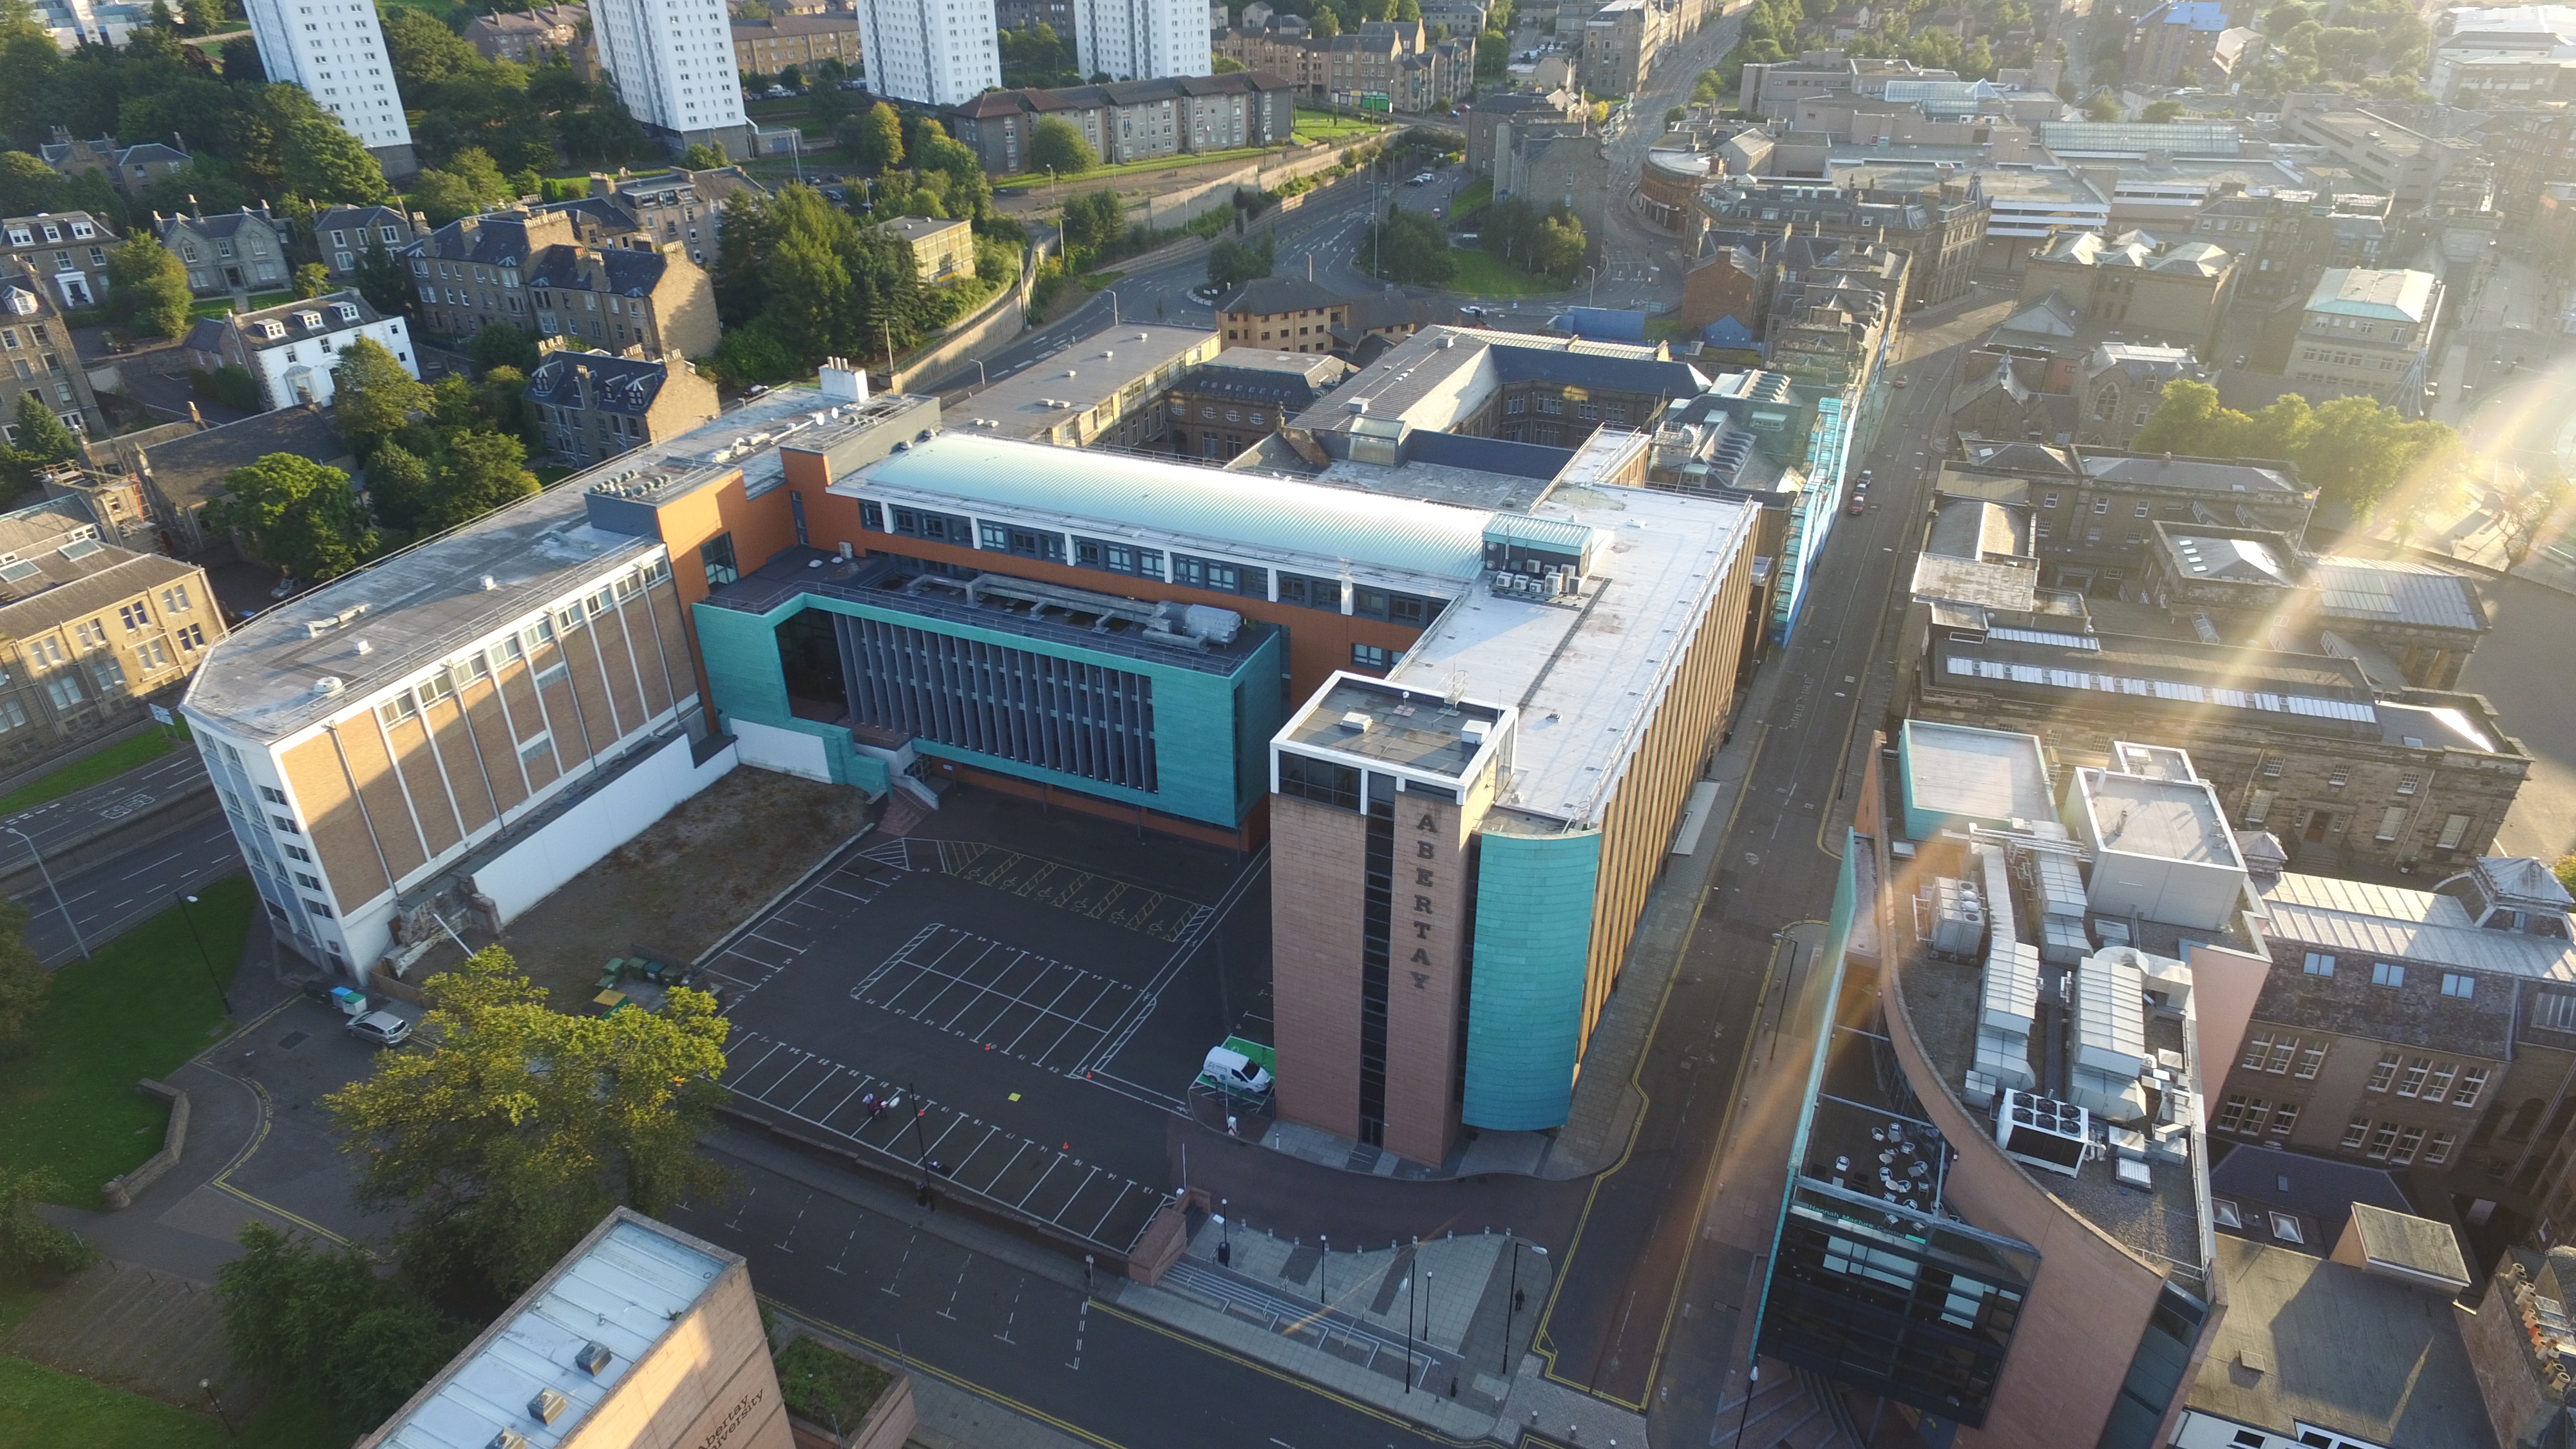 Abertay Campus - image taken from above